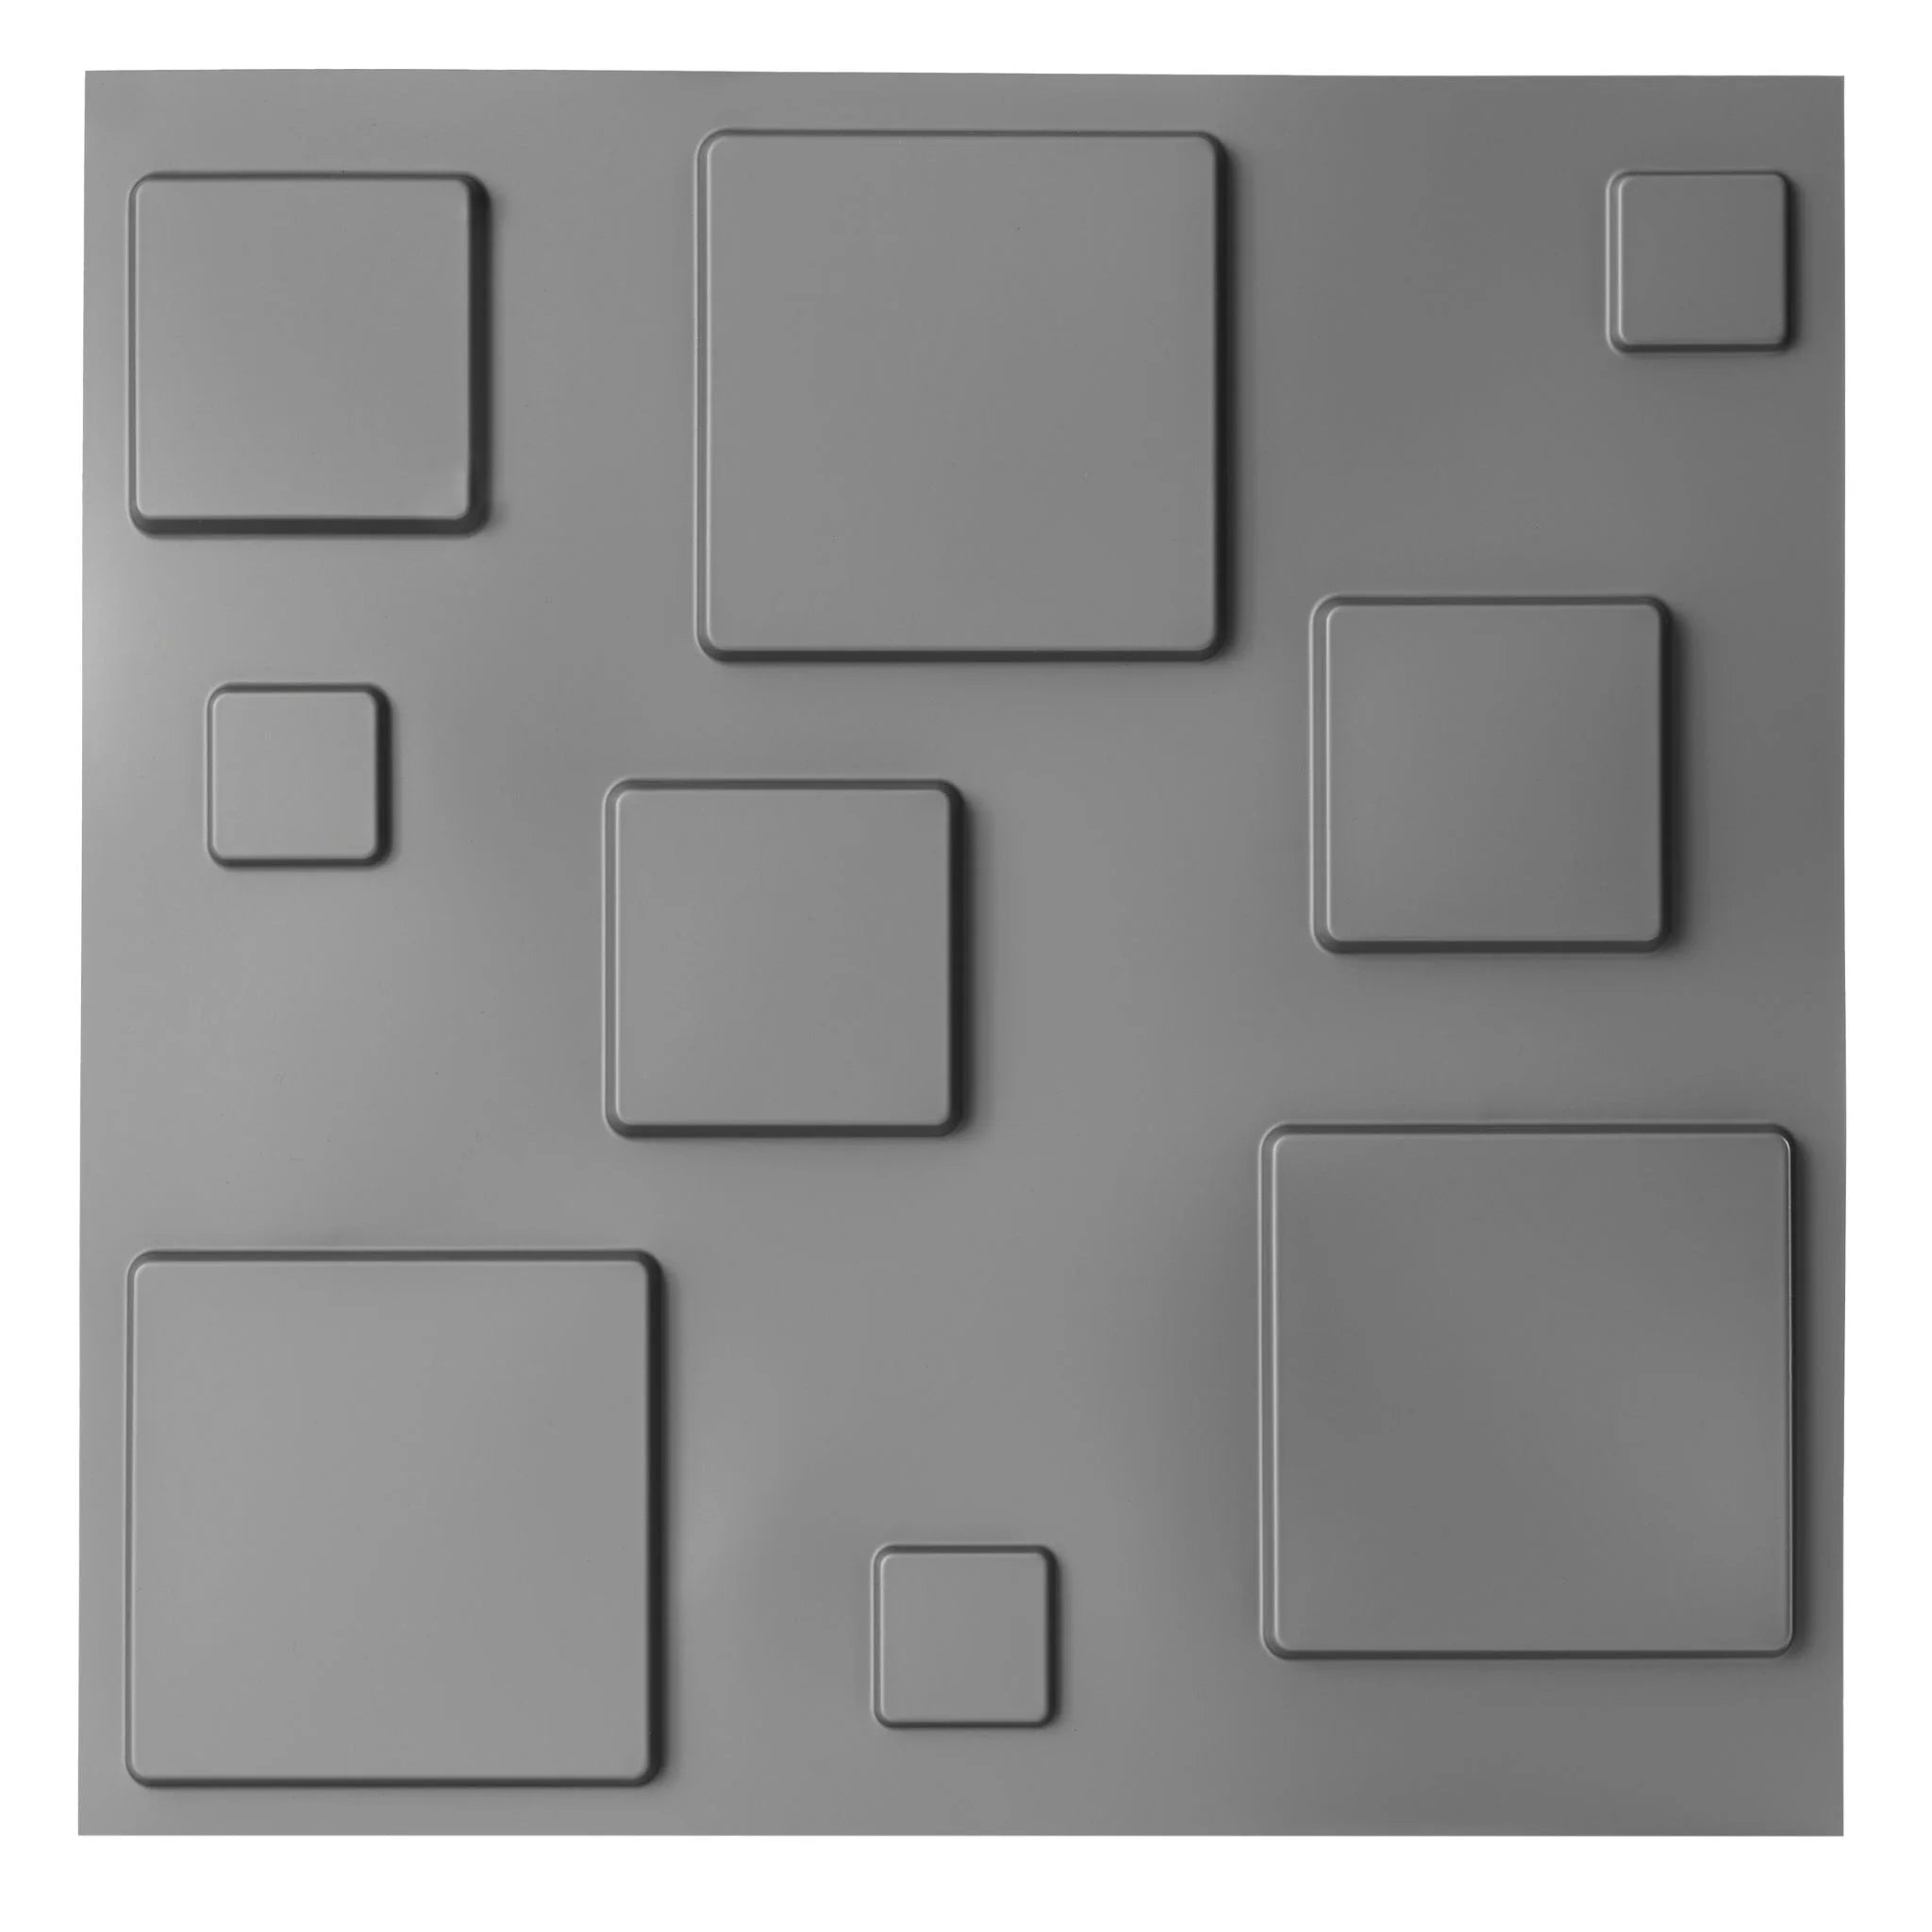 Silver PVC wall panel with geometric square patterns, close-up view